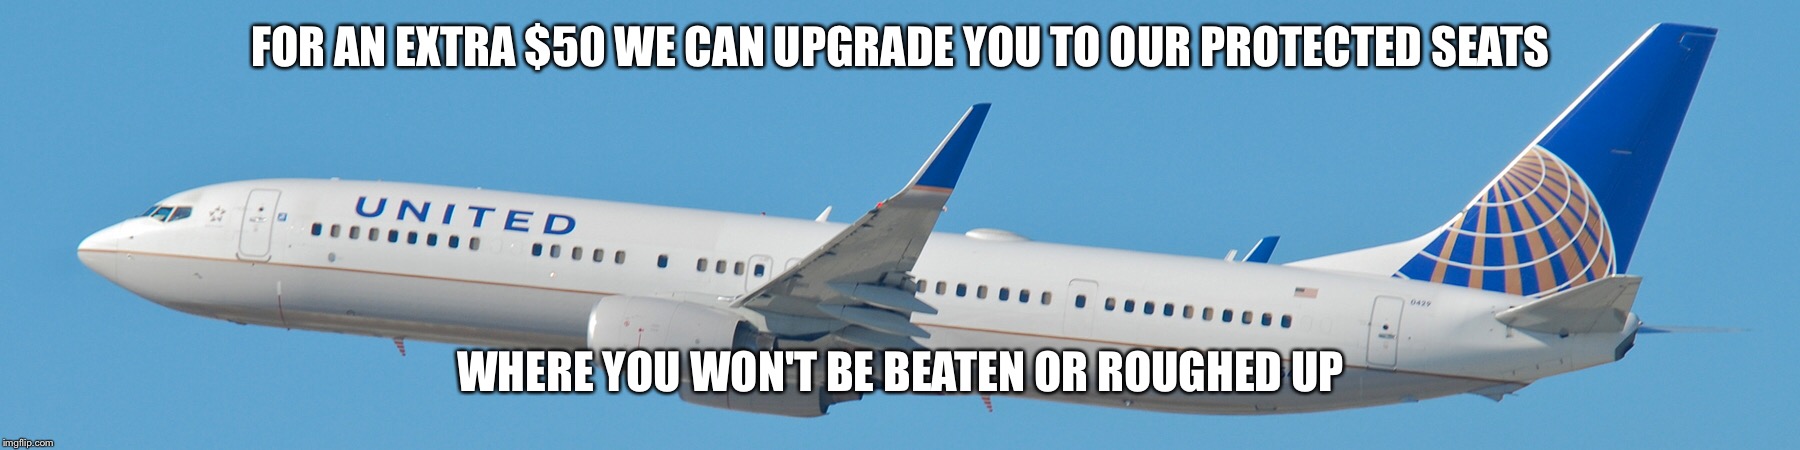 FOR AN EXTRA $50 WE CAN UPGRADE YOU TO OUR PROTECTED SEATS; WHERE YOU WON'T BE BEATEN OR ROUGHED UP | image tagged in united airlines | made w/ Imgflip meme maker